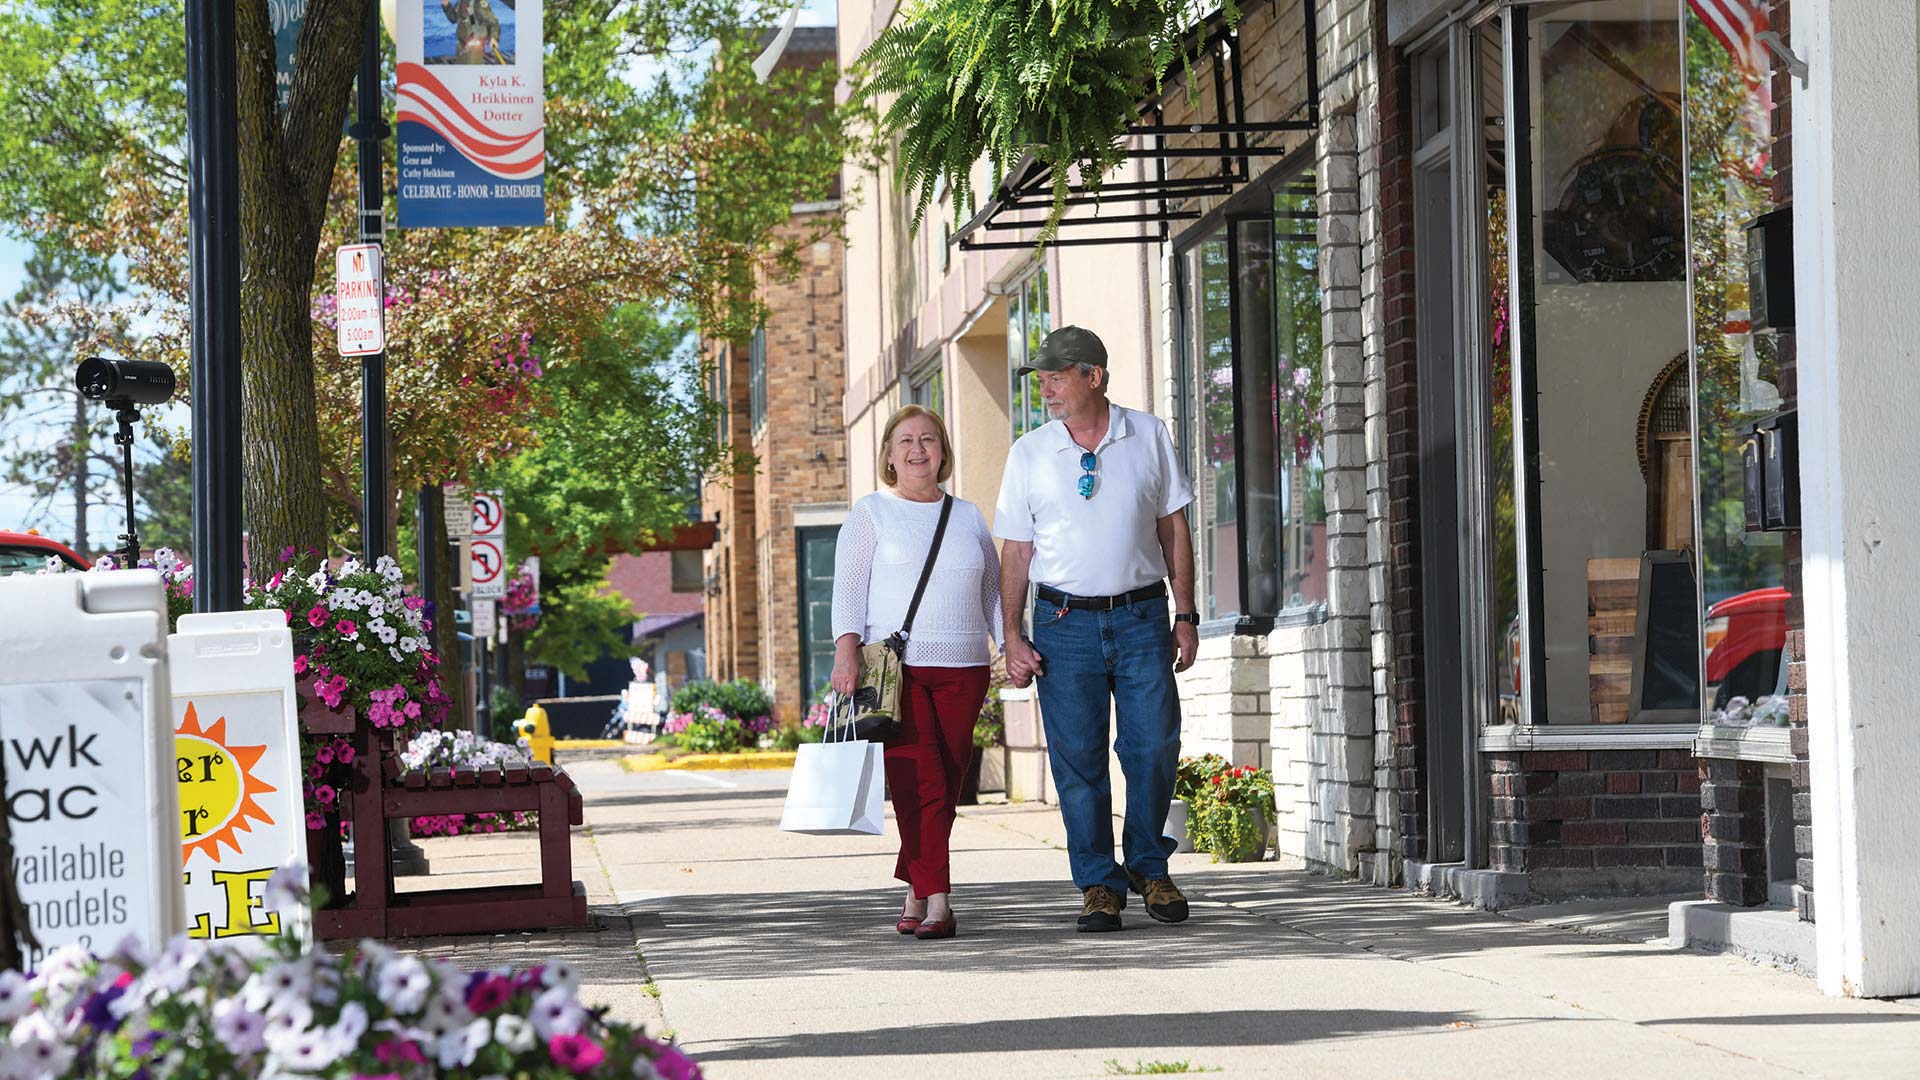 Couple walking the sidewalk next to some shops in downtown Tomahawk